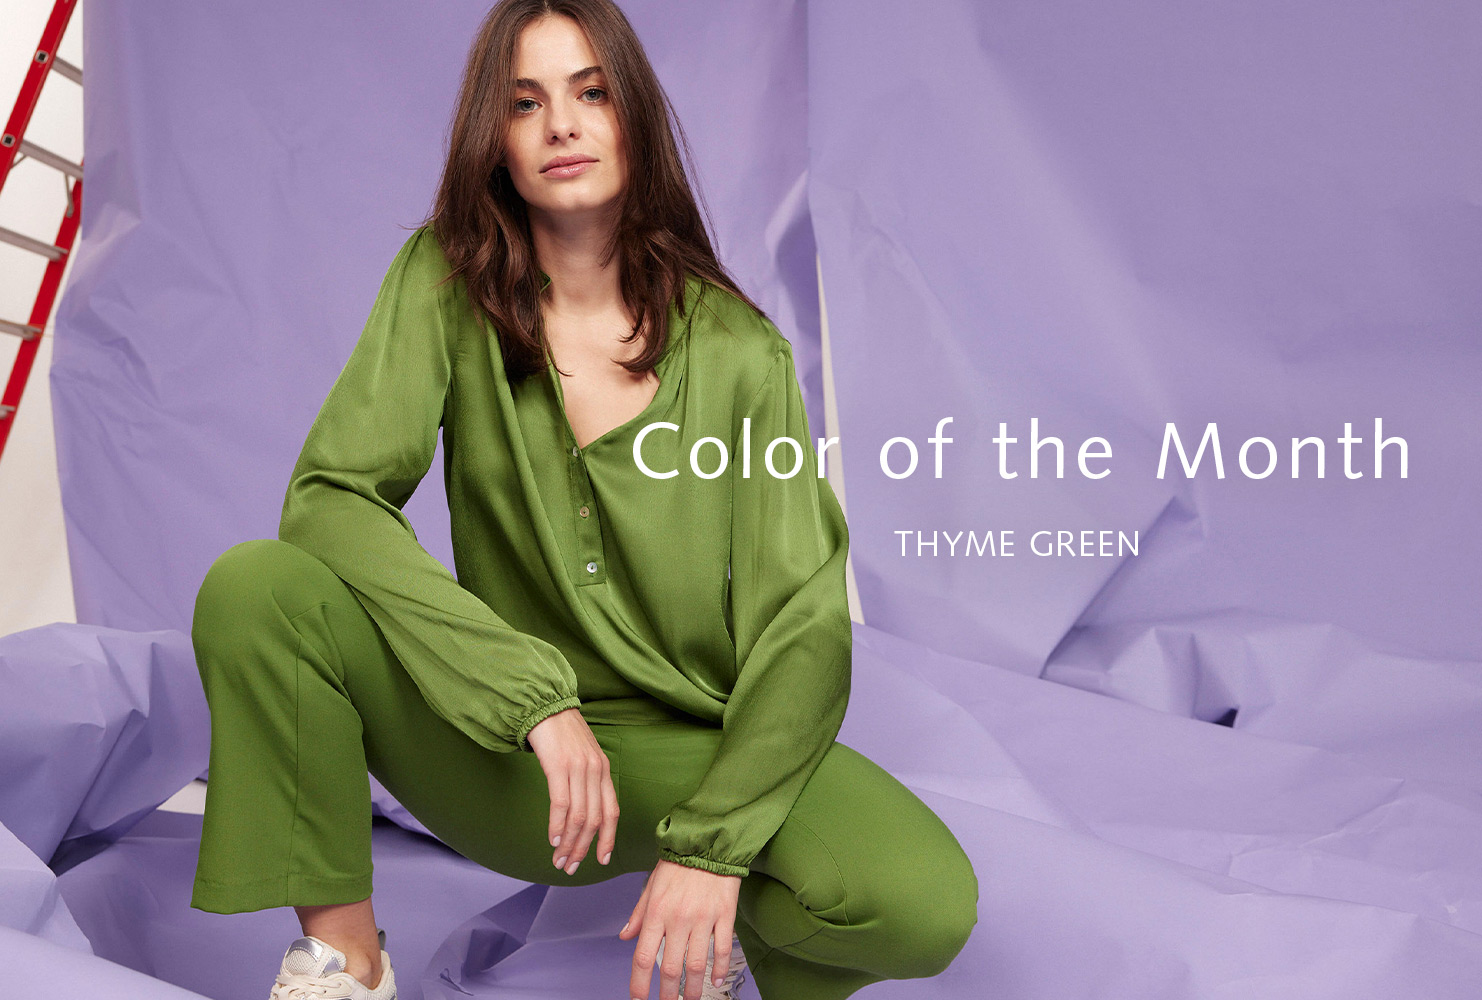 Color of the Month thyme green